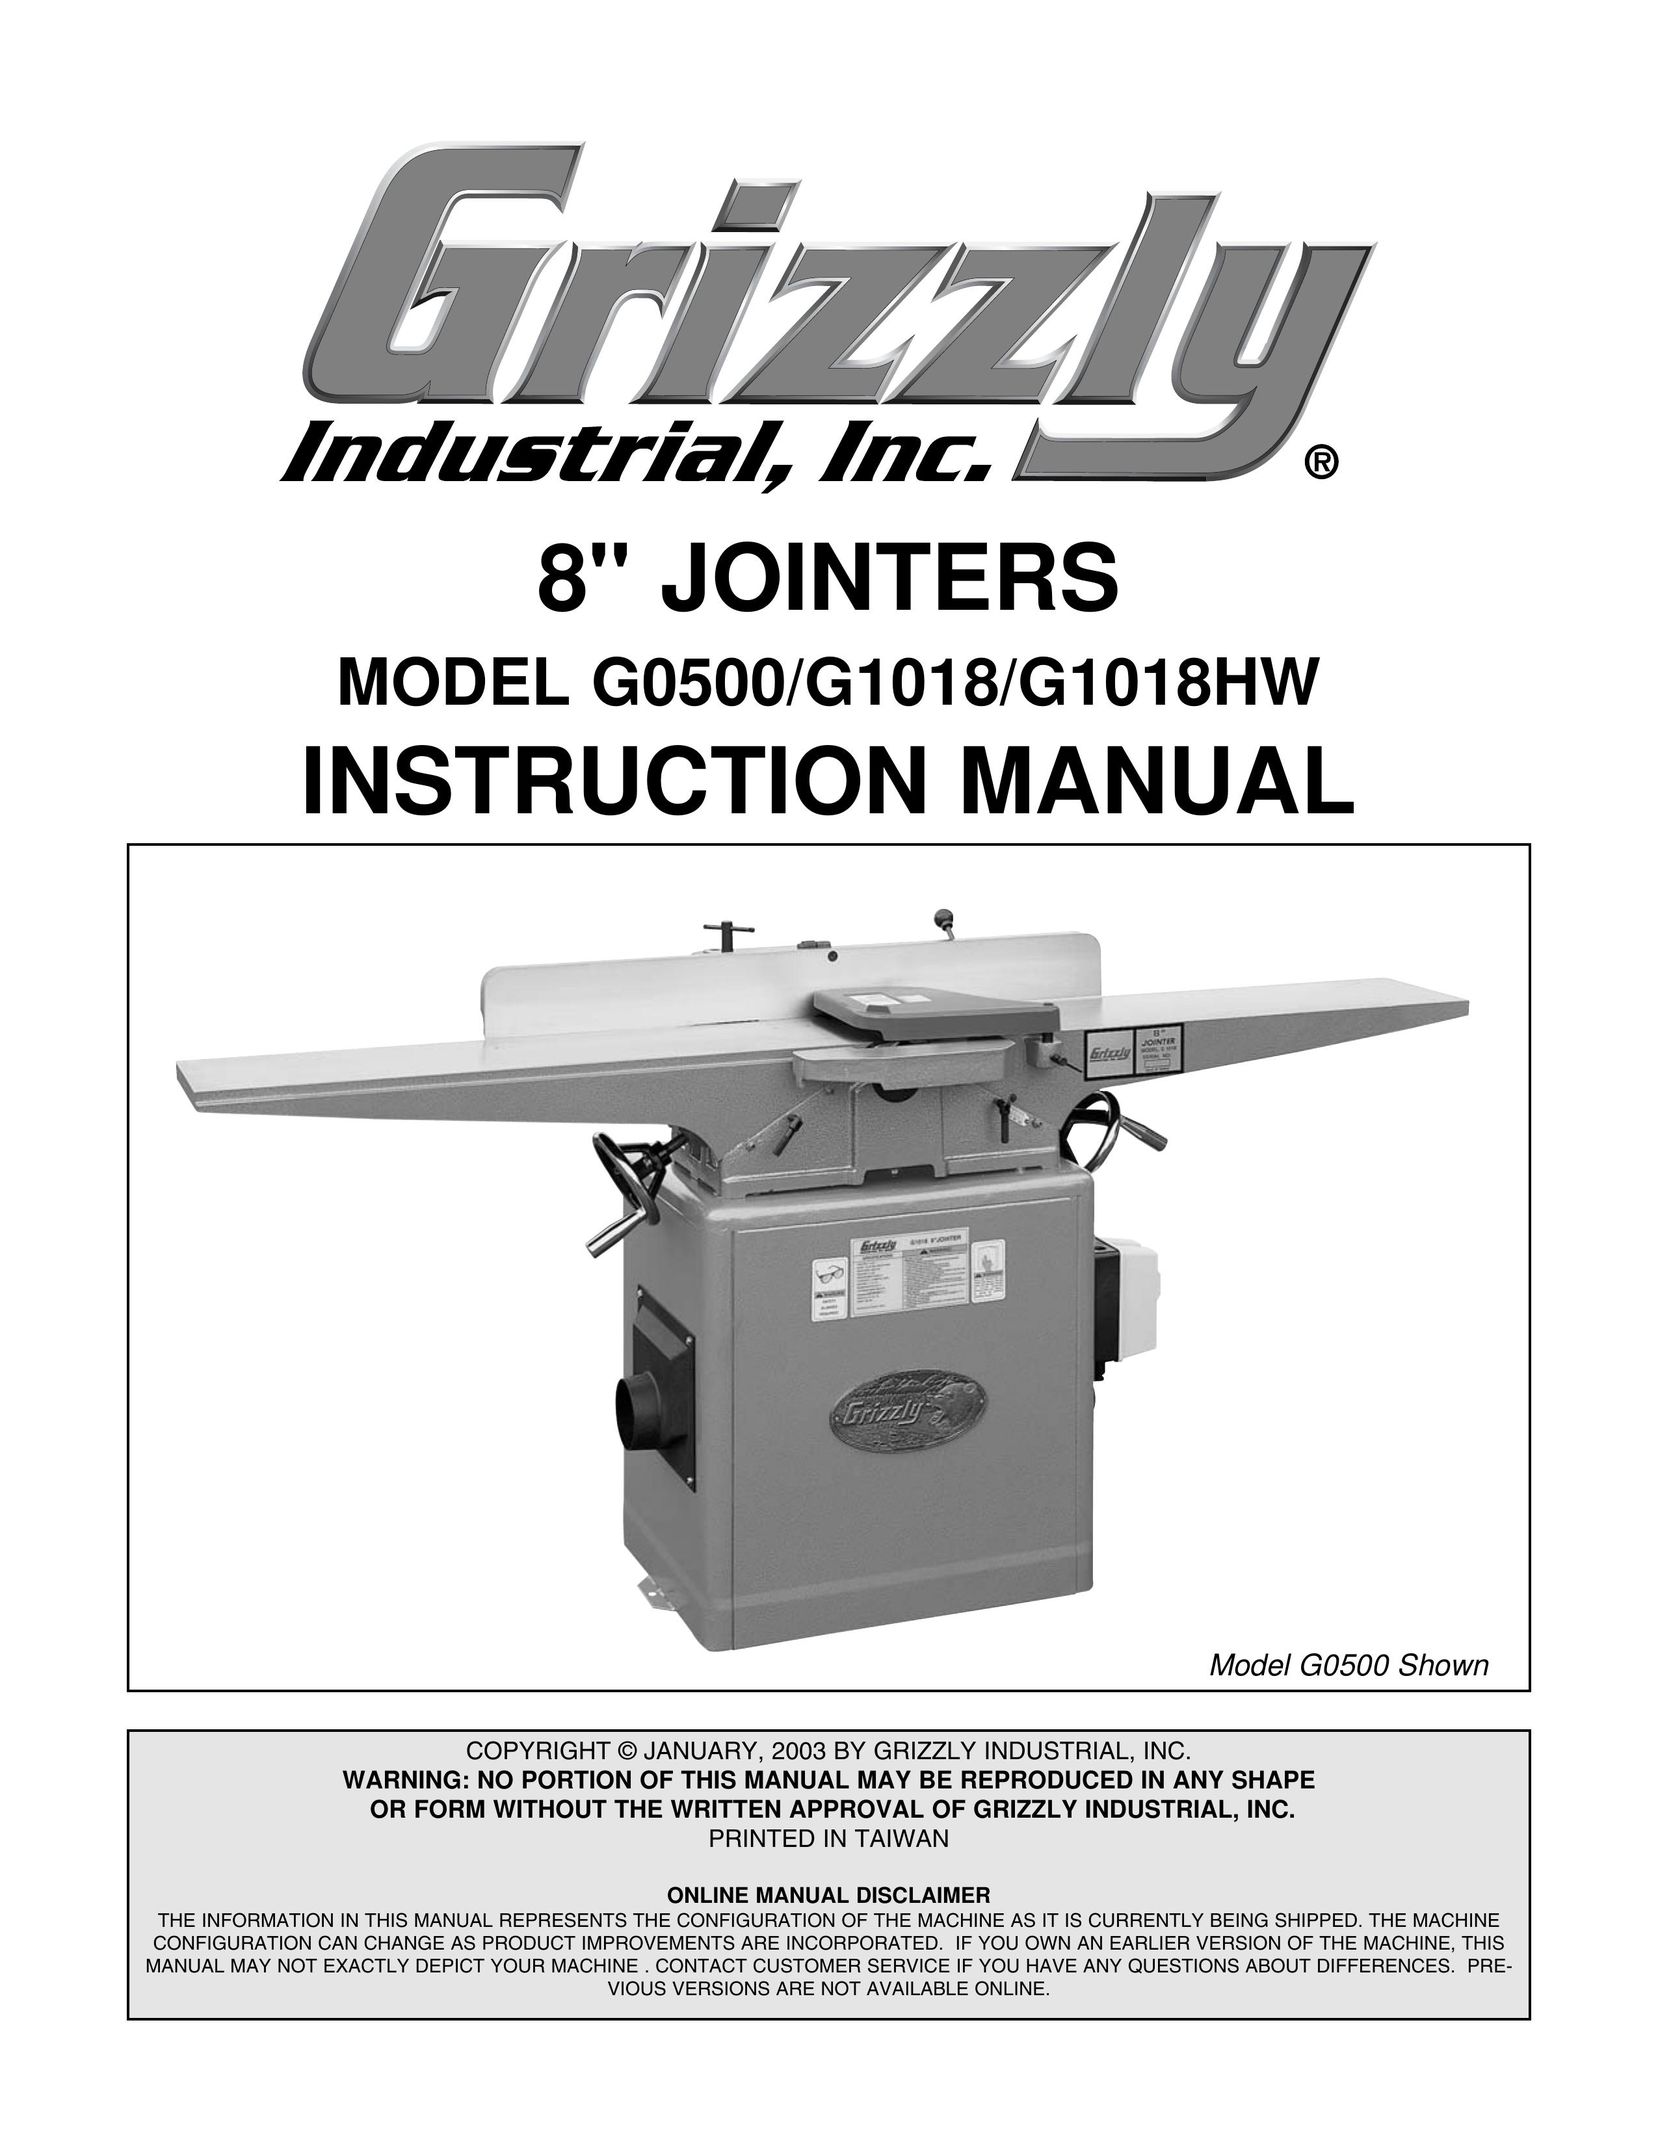 Grizzly G1018HW Biscuit Joiner User Manual (Page 1)